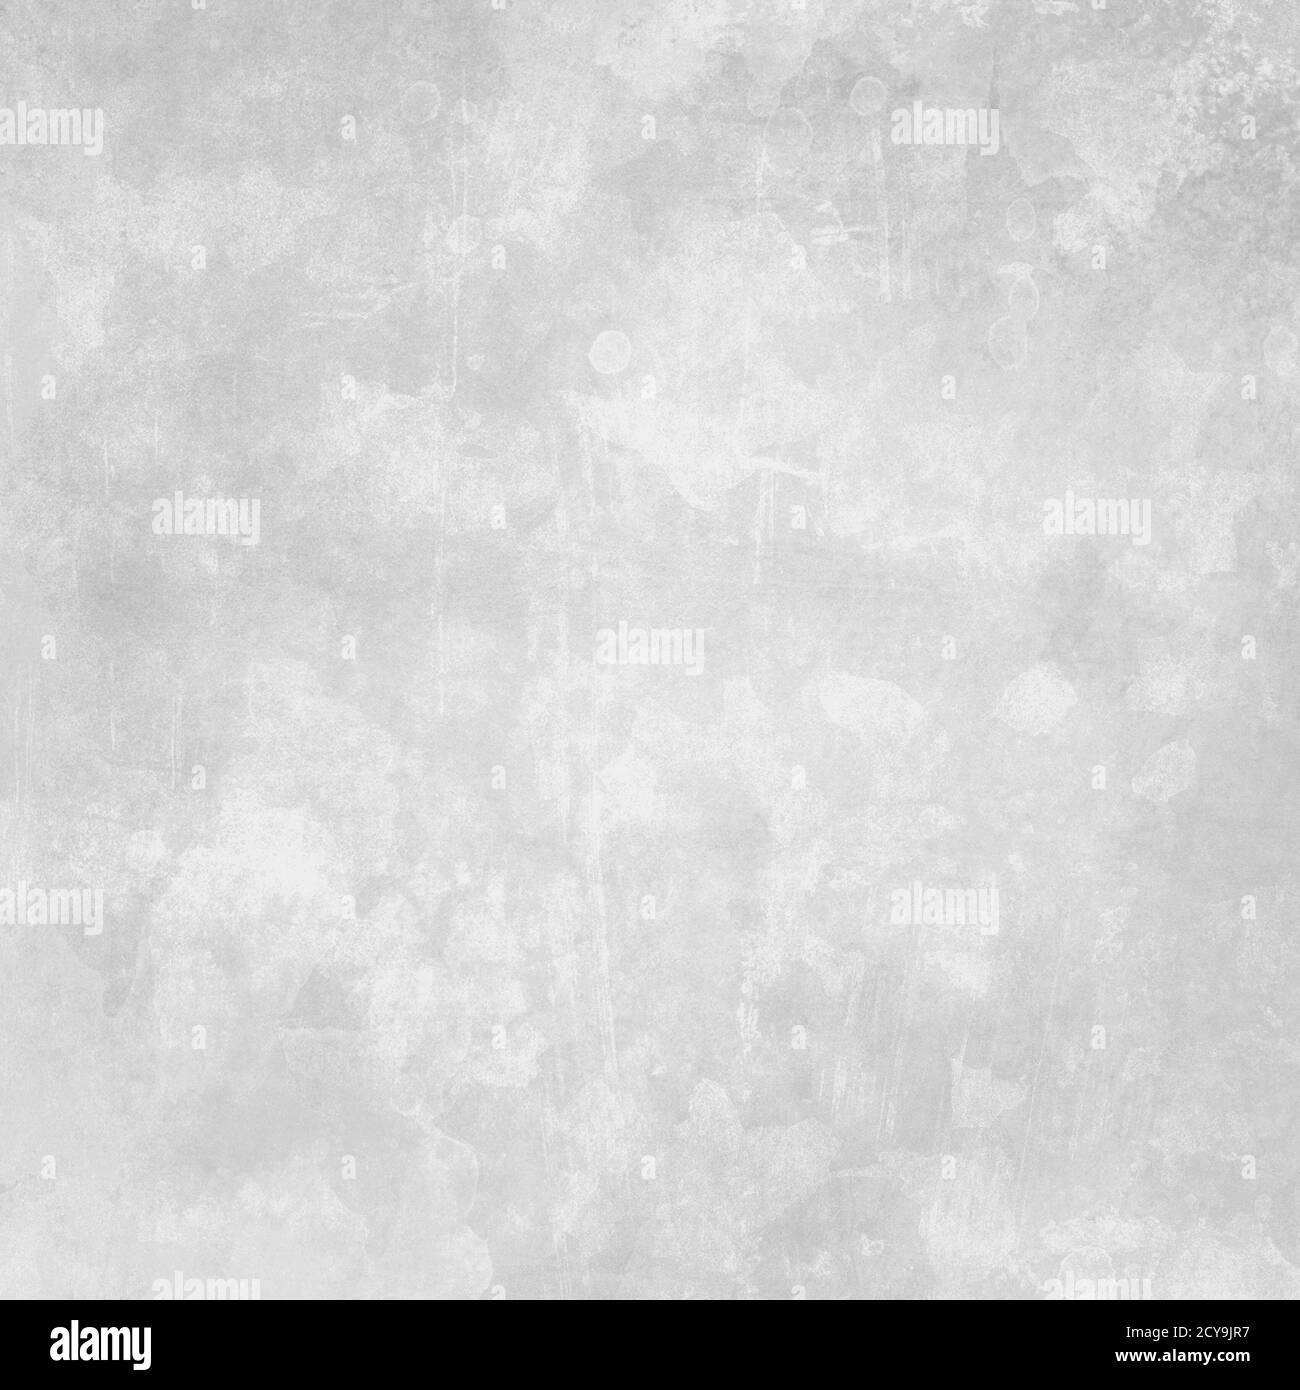 white and gray background with faint grunge texture, old vintage paper illustration in neutral pale color Stock Photo